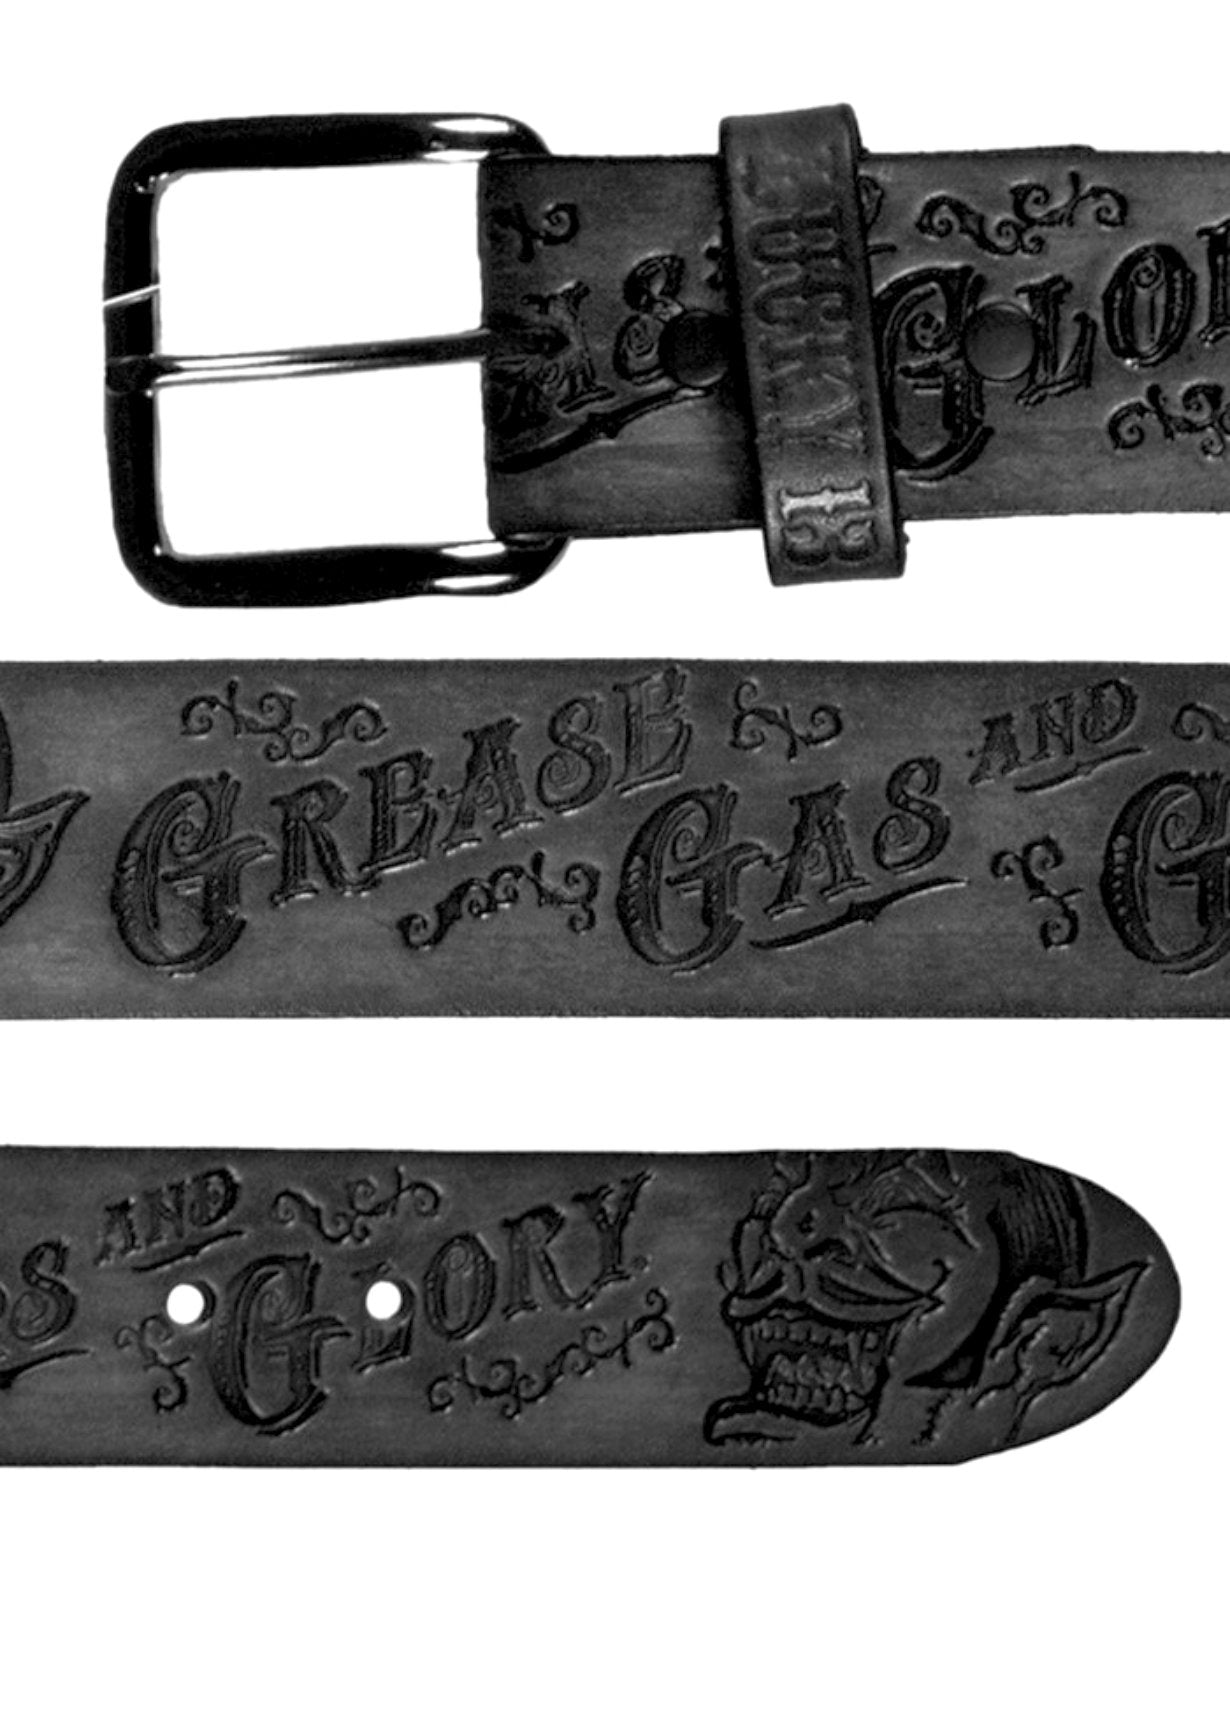 The GREASE, GAS AND GLORY Belt - BLACK